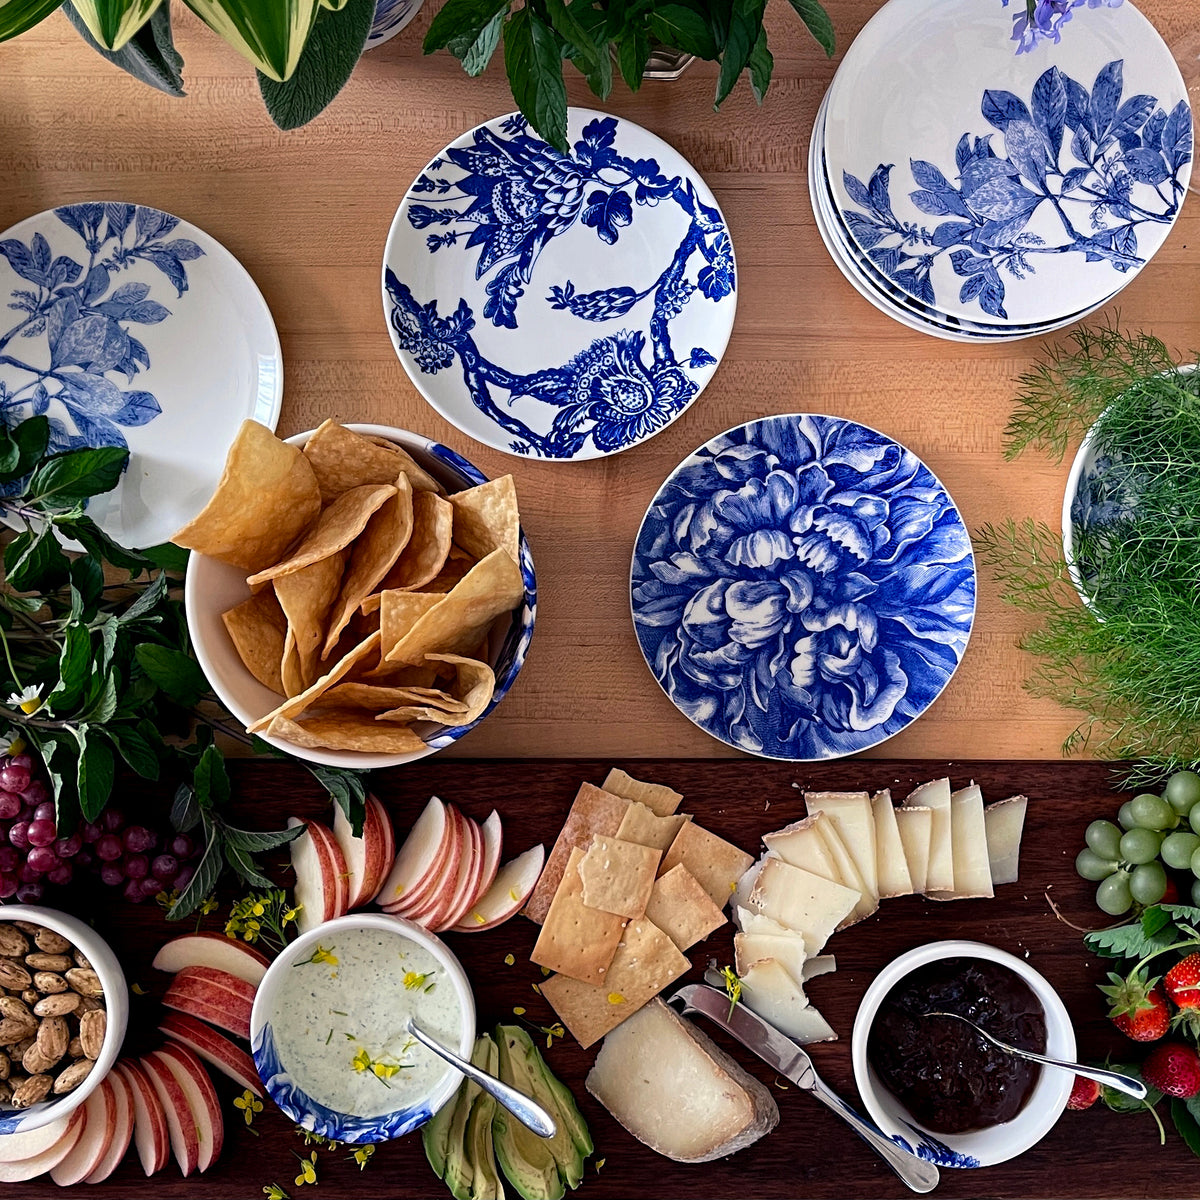 An overhead view of a wooden table showcases premium porcelain plates adorned with blue and white botanical details. The spread includes chips, cheese, apple slices, dip, and garnishes of fresh greens, grapes, and flowers— a perfect setting with Caskata Artisanal Home Arbor Blue Small Plates.